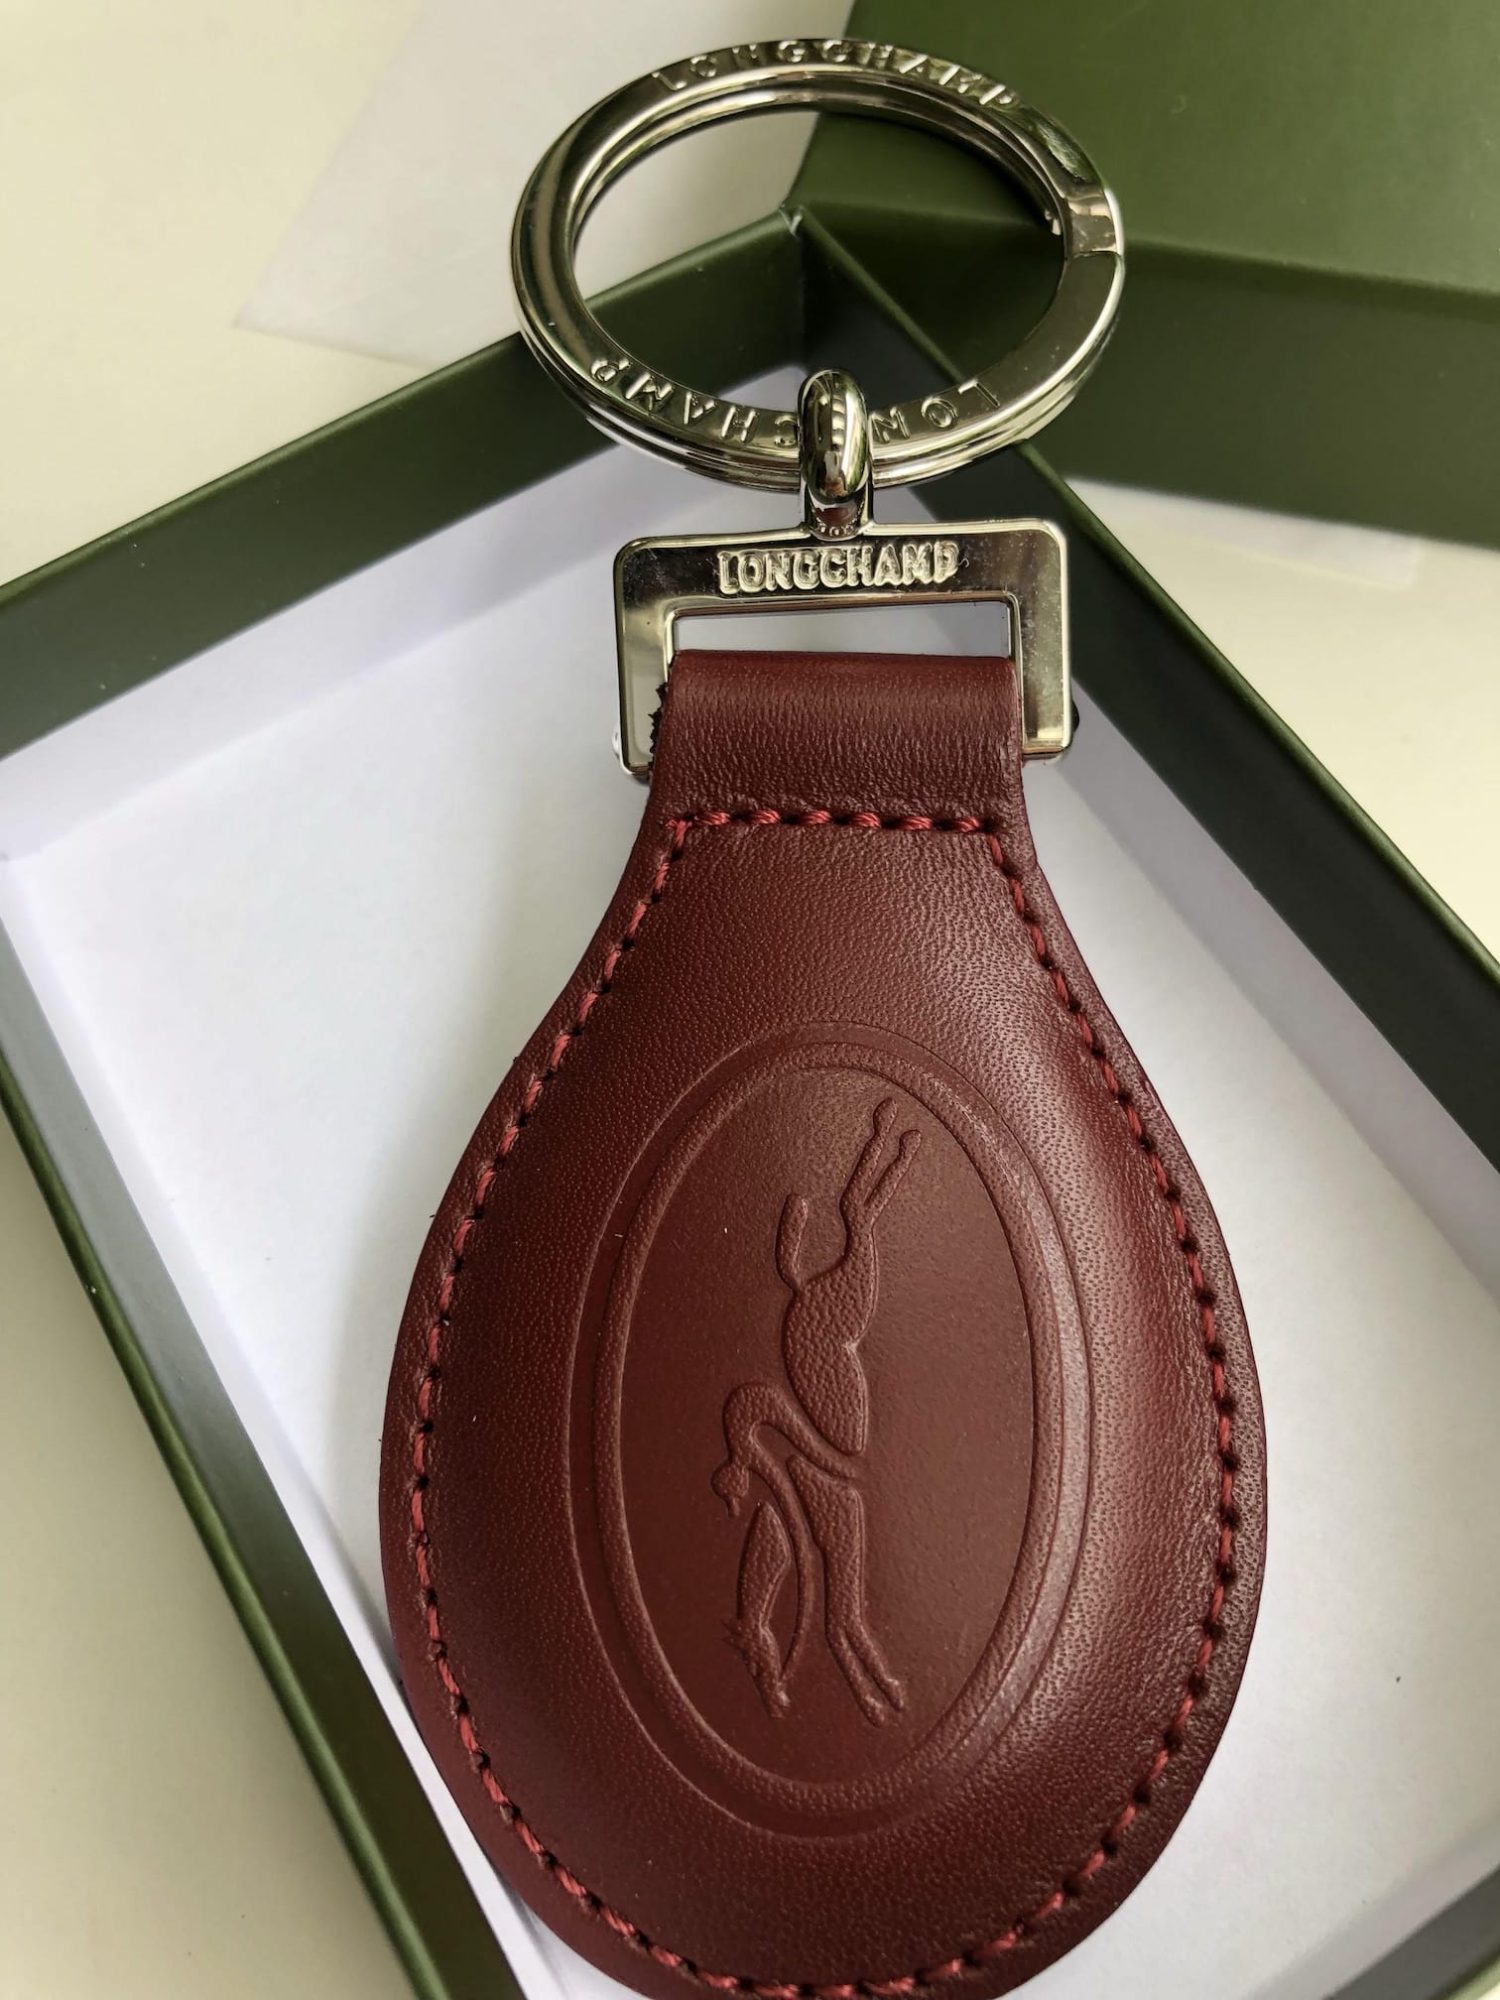 Close-up of a Longchamp key ring, highlighting the fine leather and logo detail